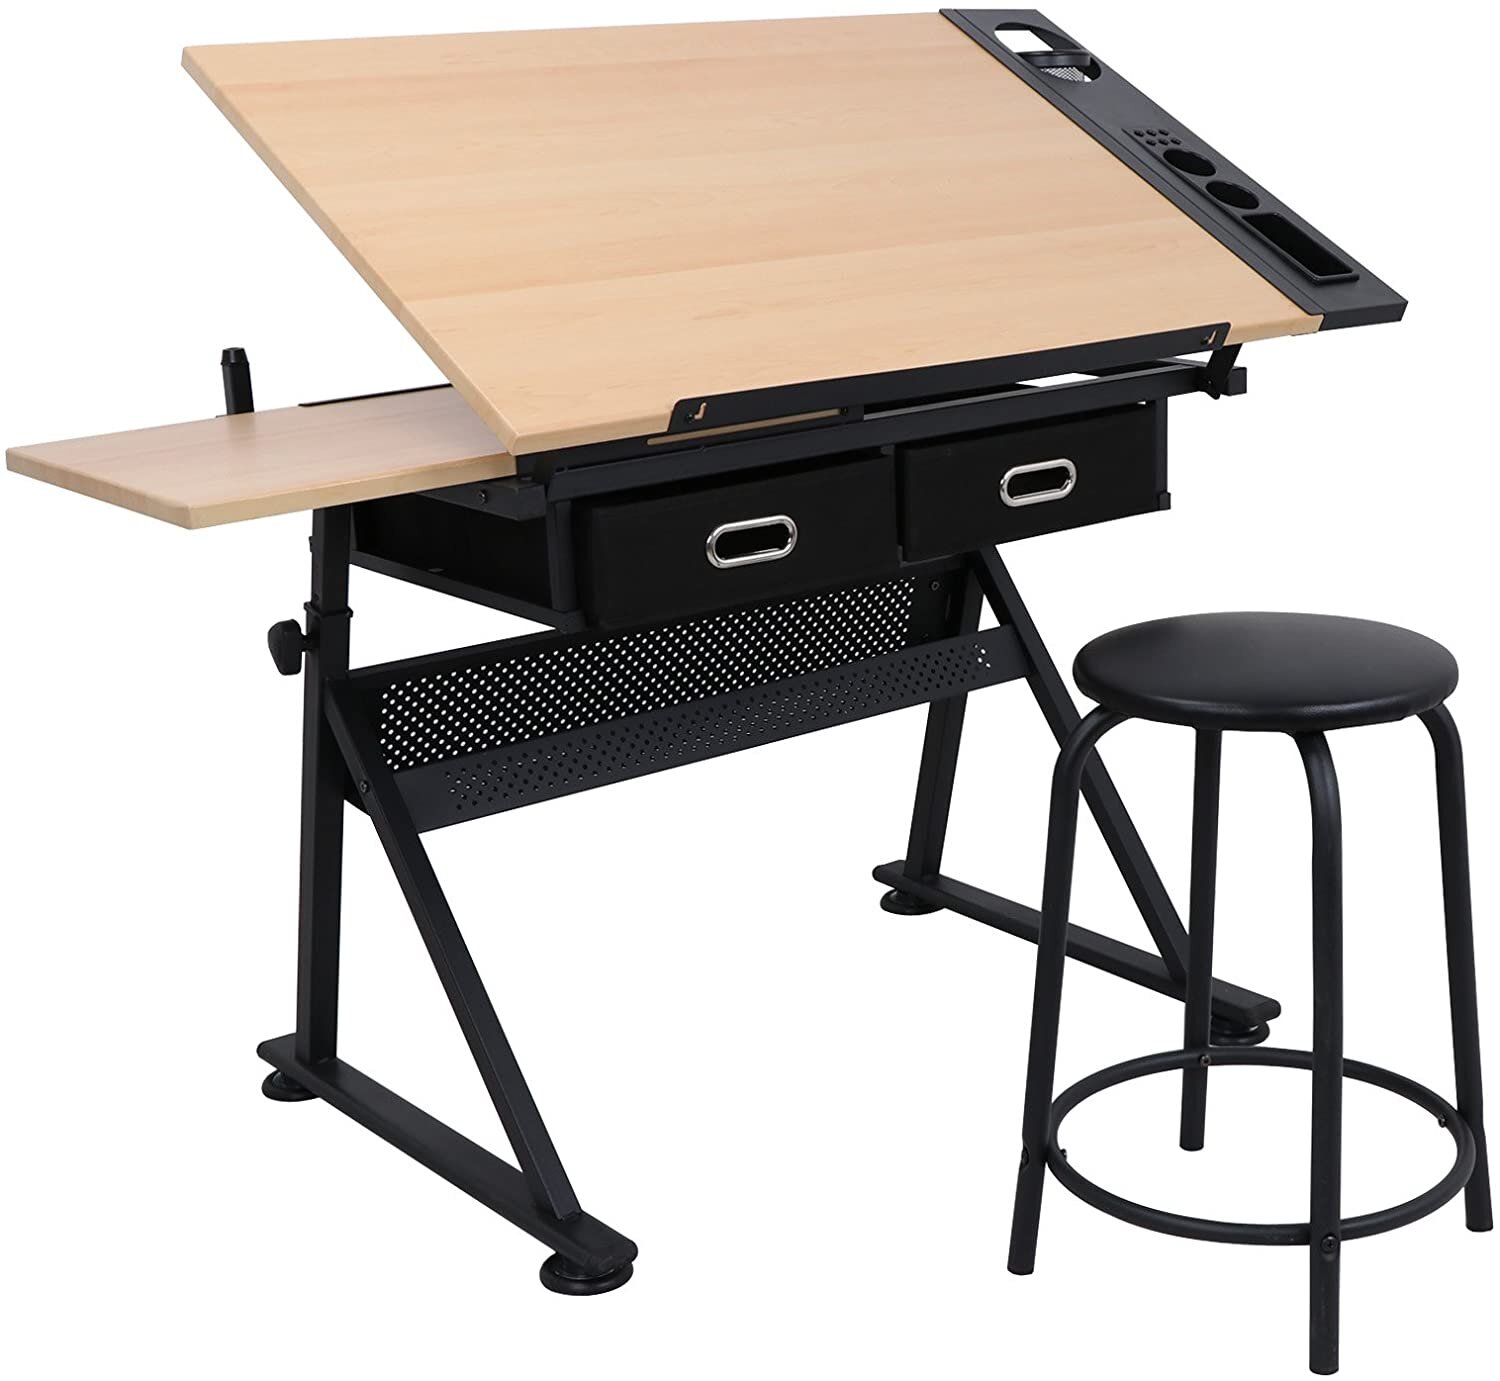 Cheap drafting table from Amazon